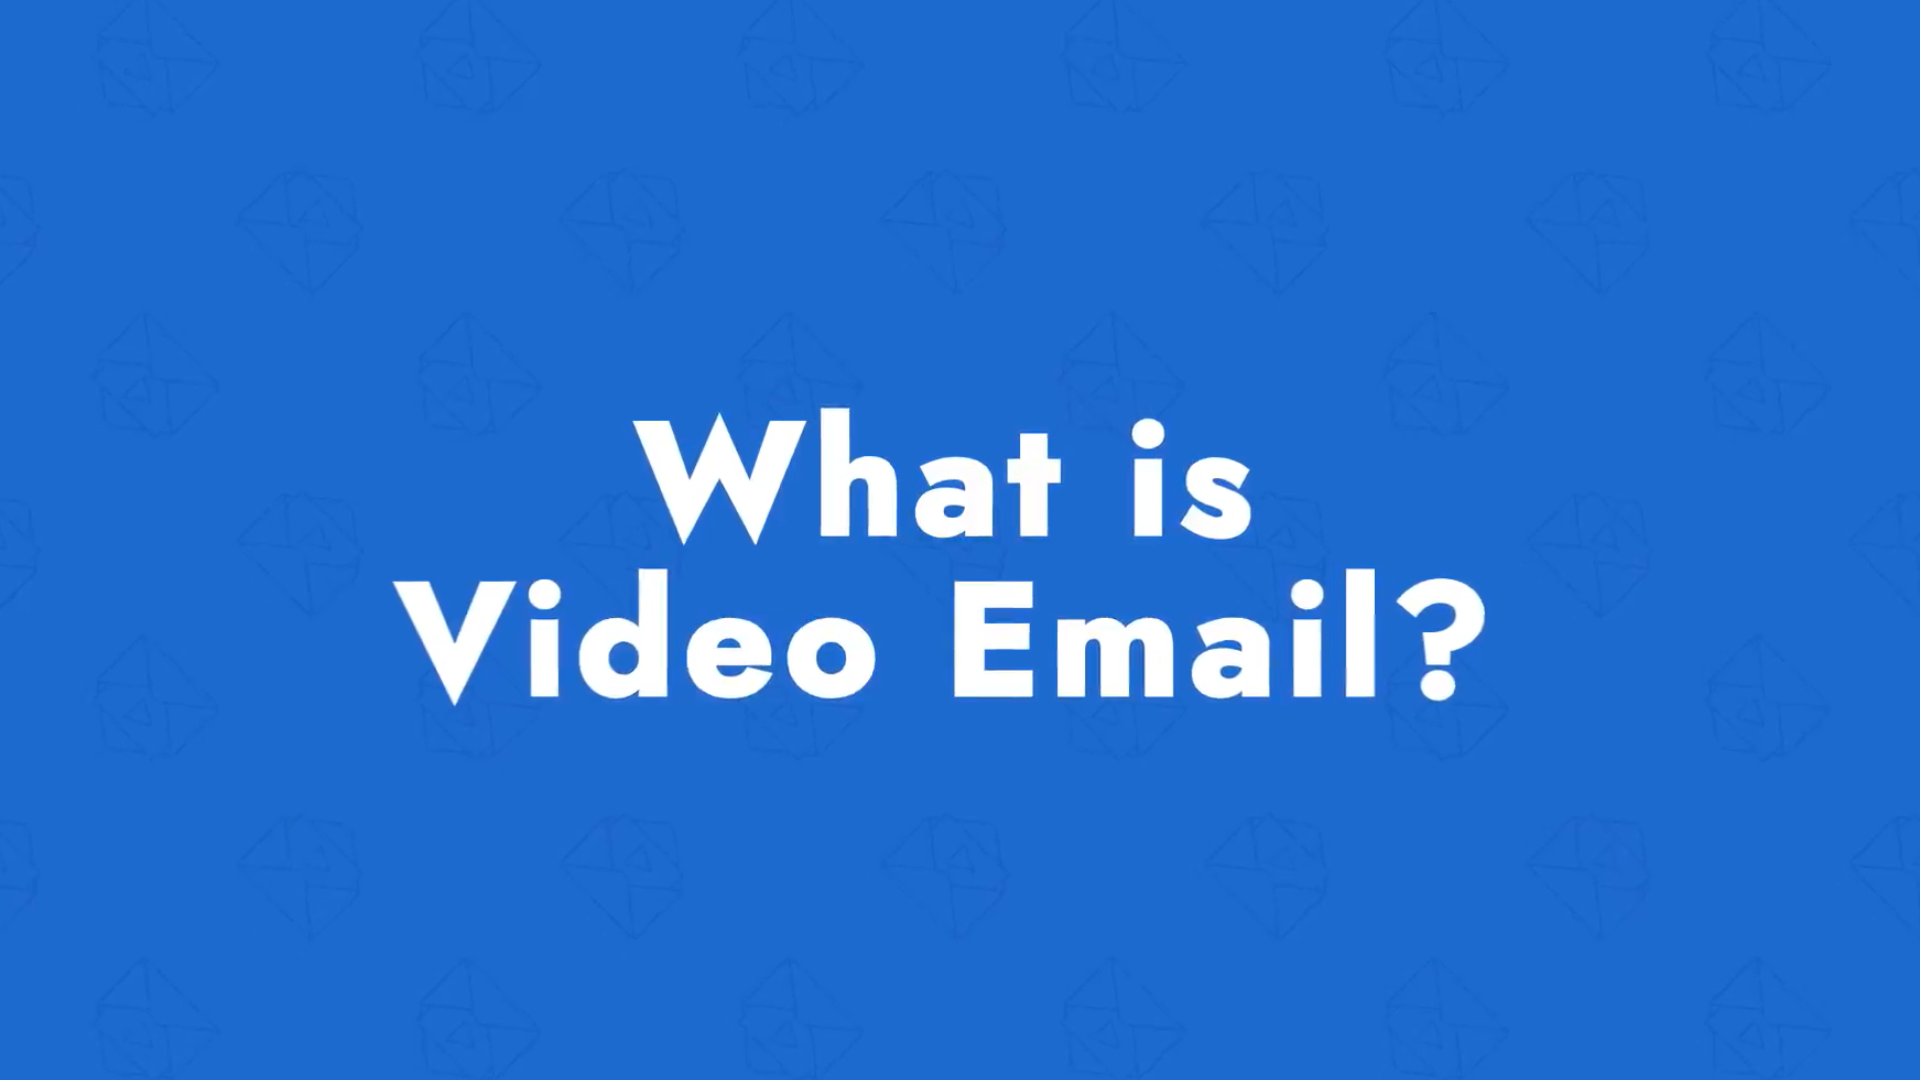 What is Video Email?